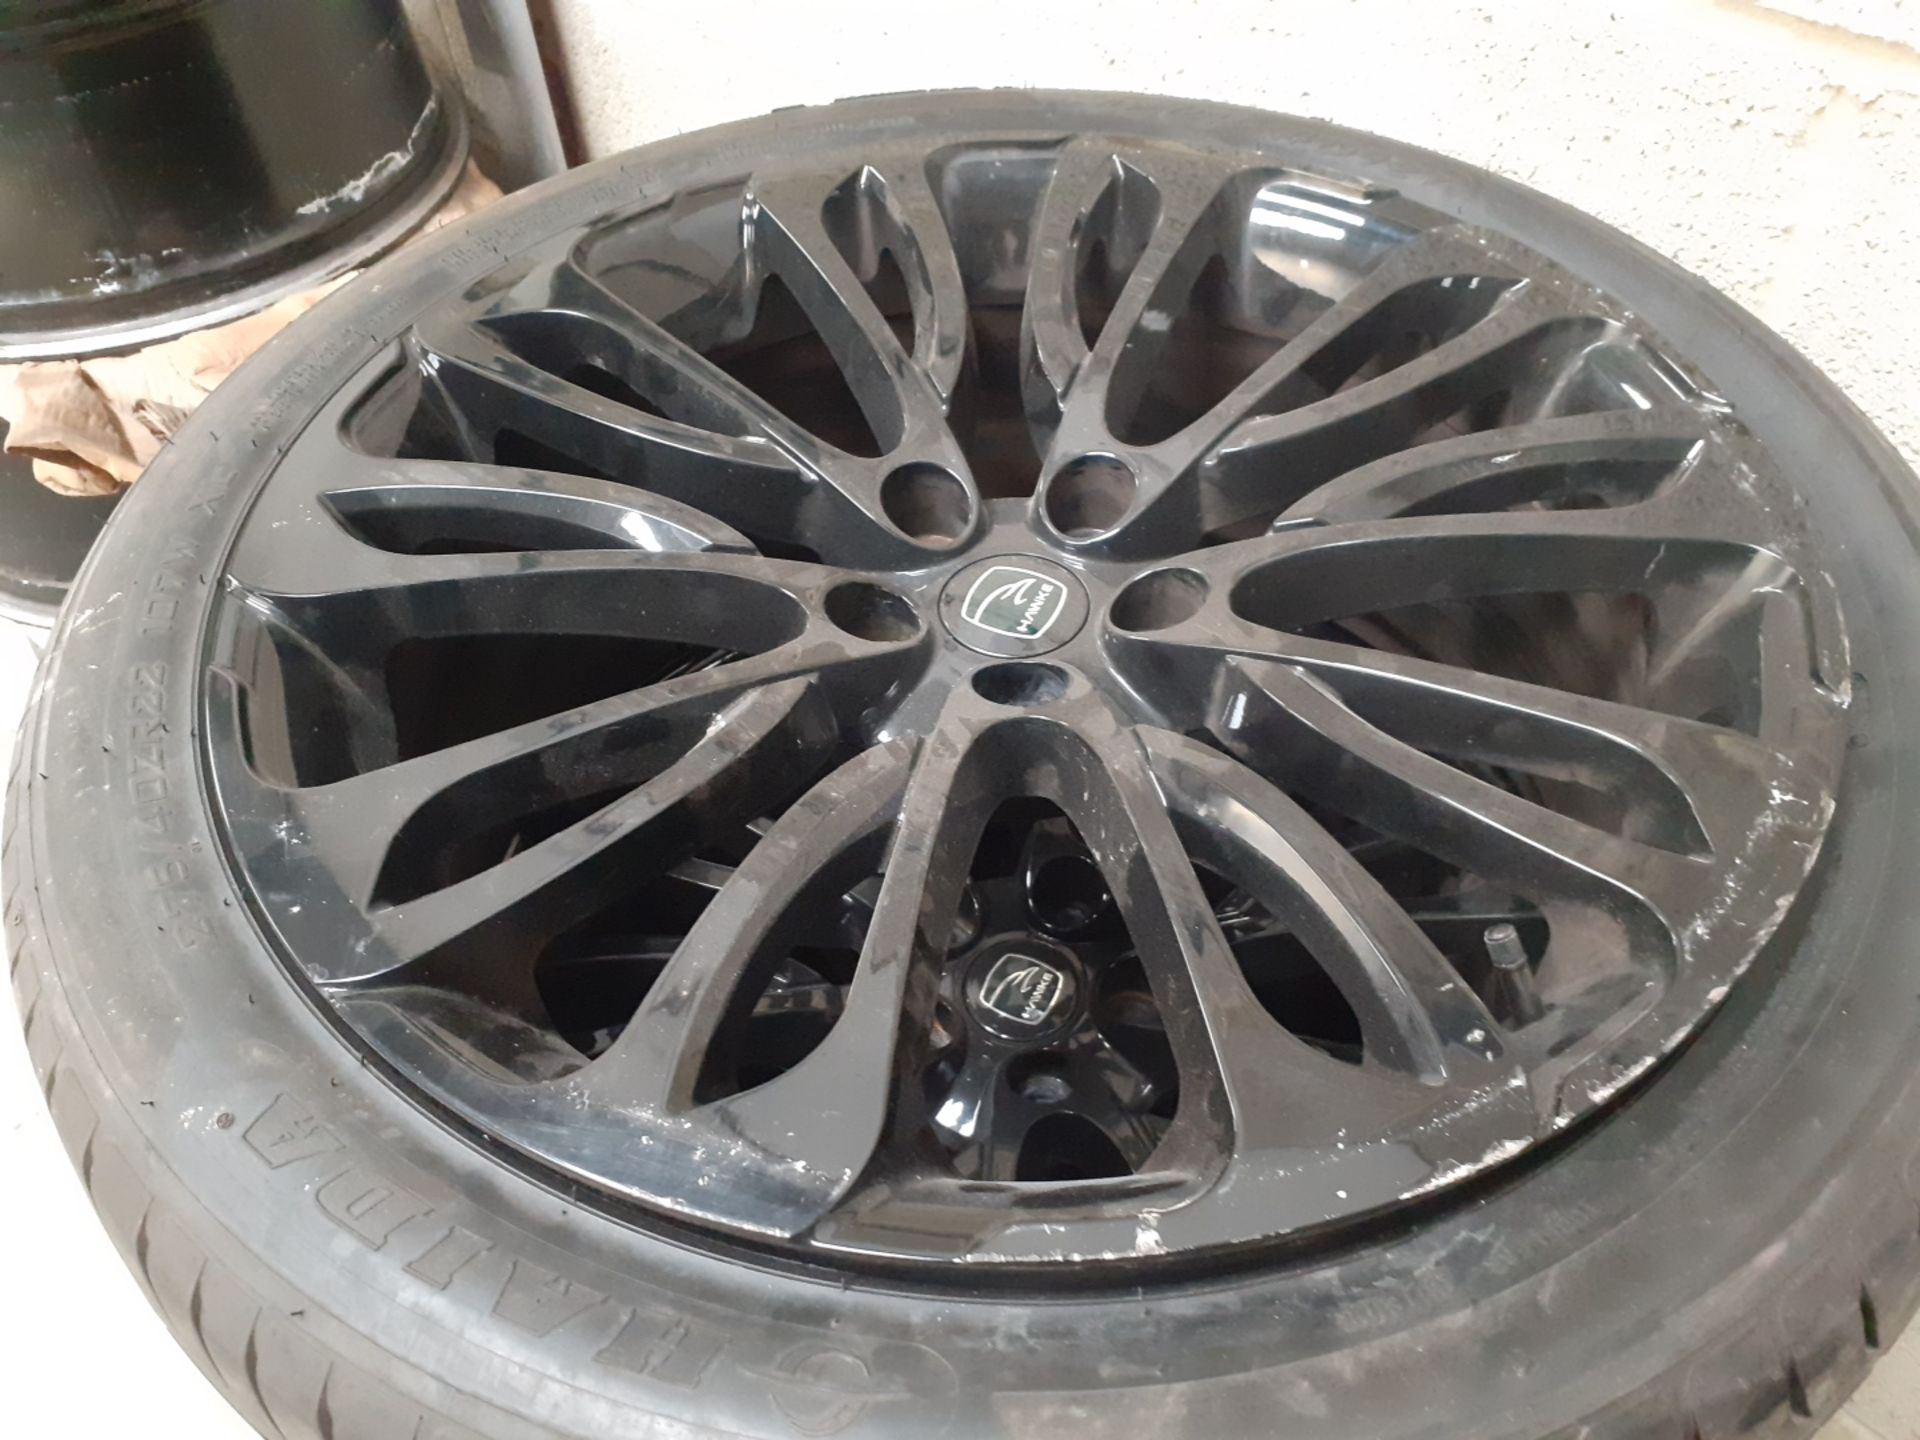 JOB LOT OF 30 SETS OF ALLOY WHEELS WITH TYRES, LAND ROVER RANGE ROVER, OVER £31K RRP *NO VAT* - Image 14 of 17